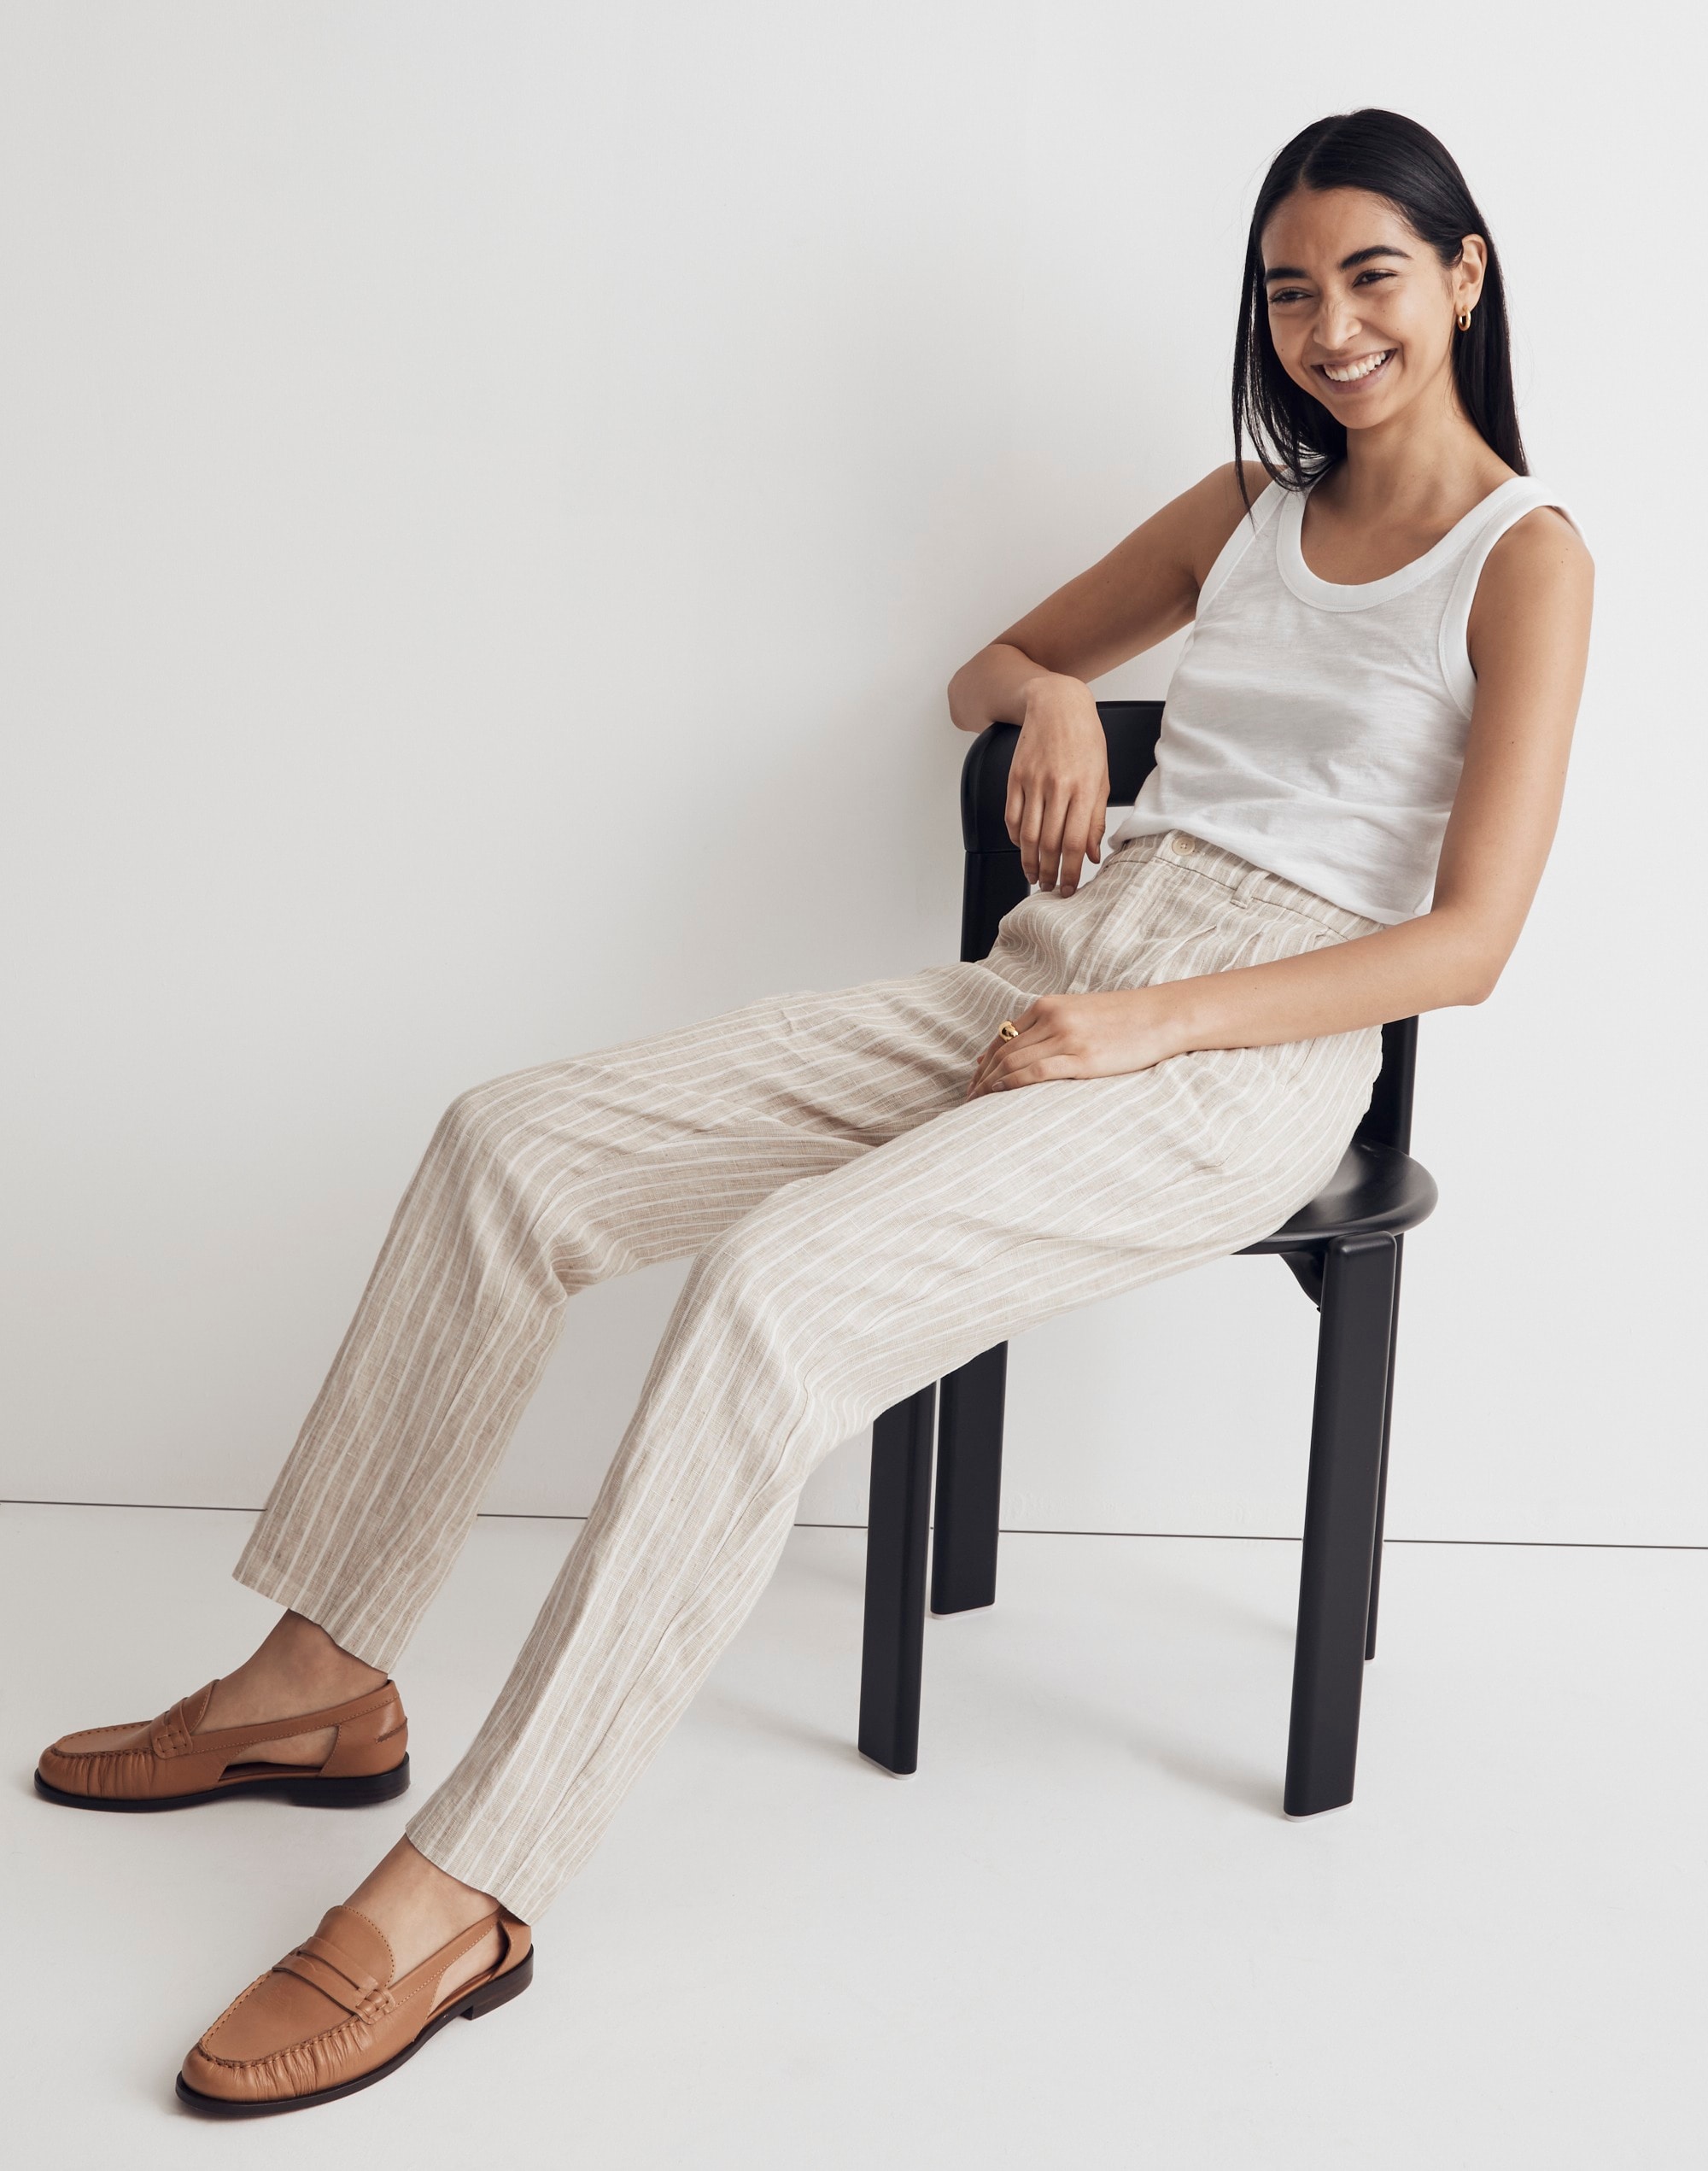 The Tall Untailored Tapered Pant Striped 100% Linen